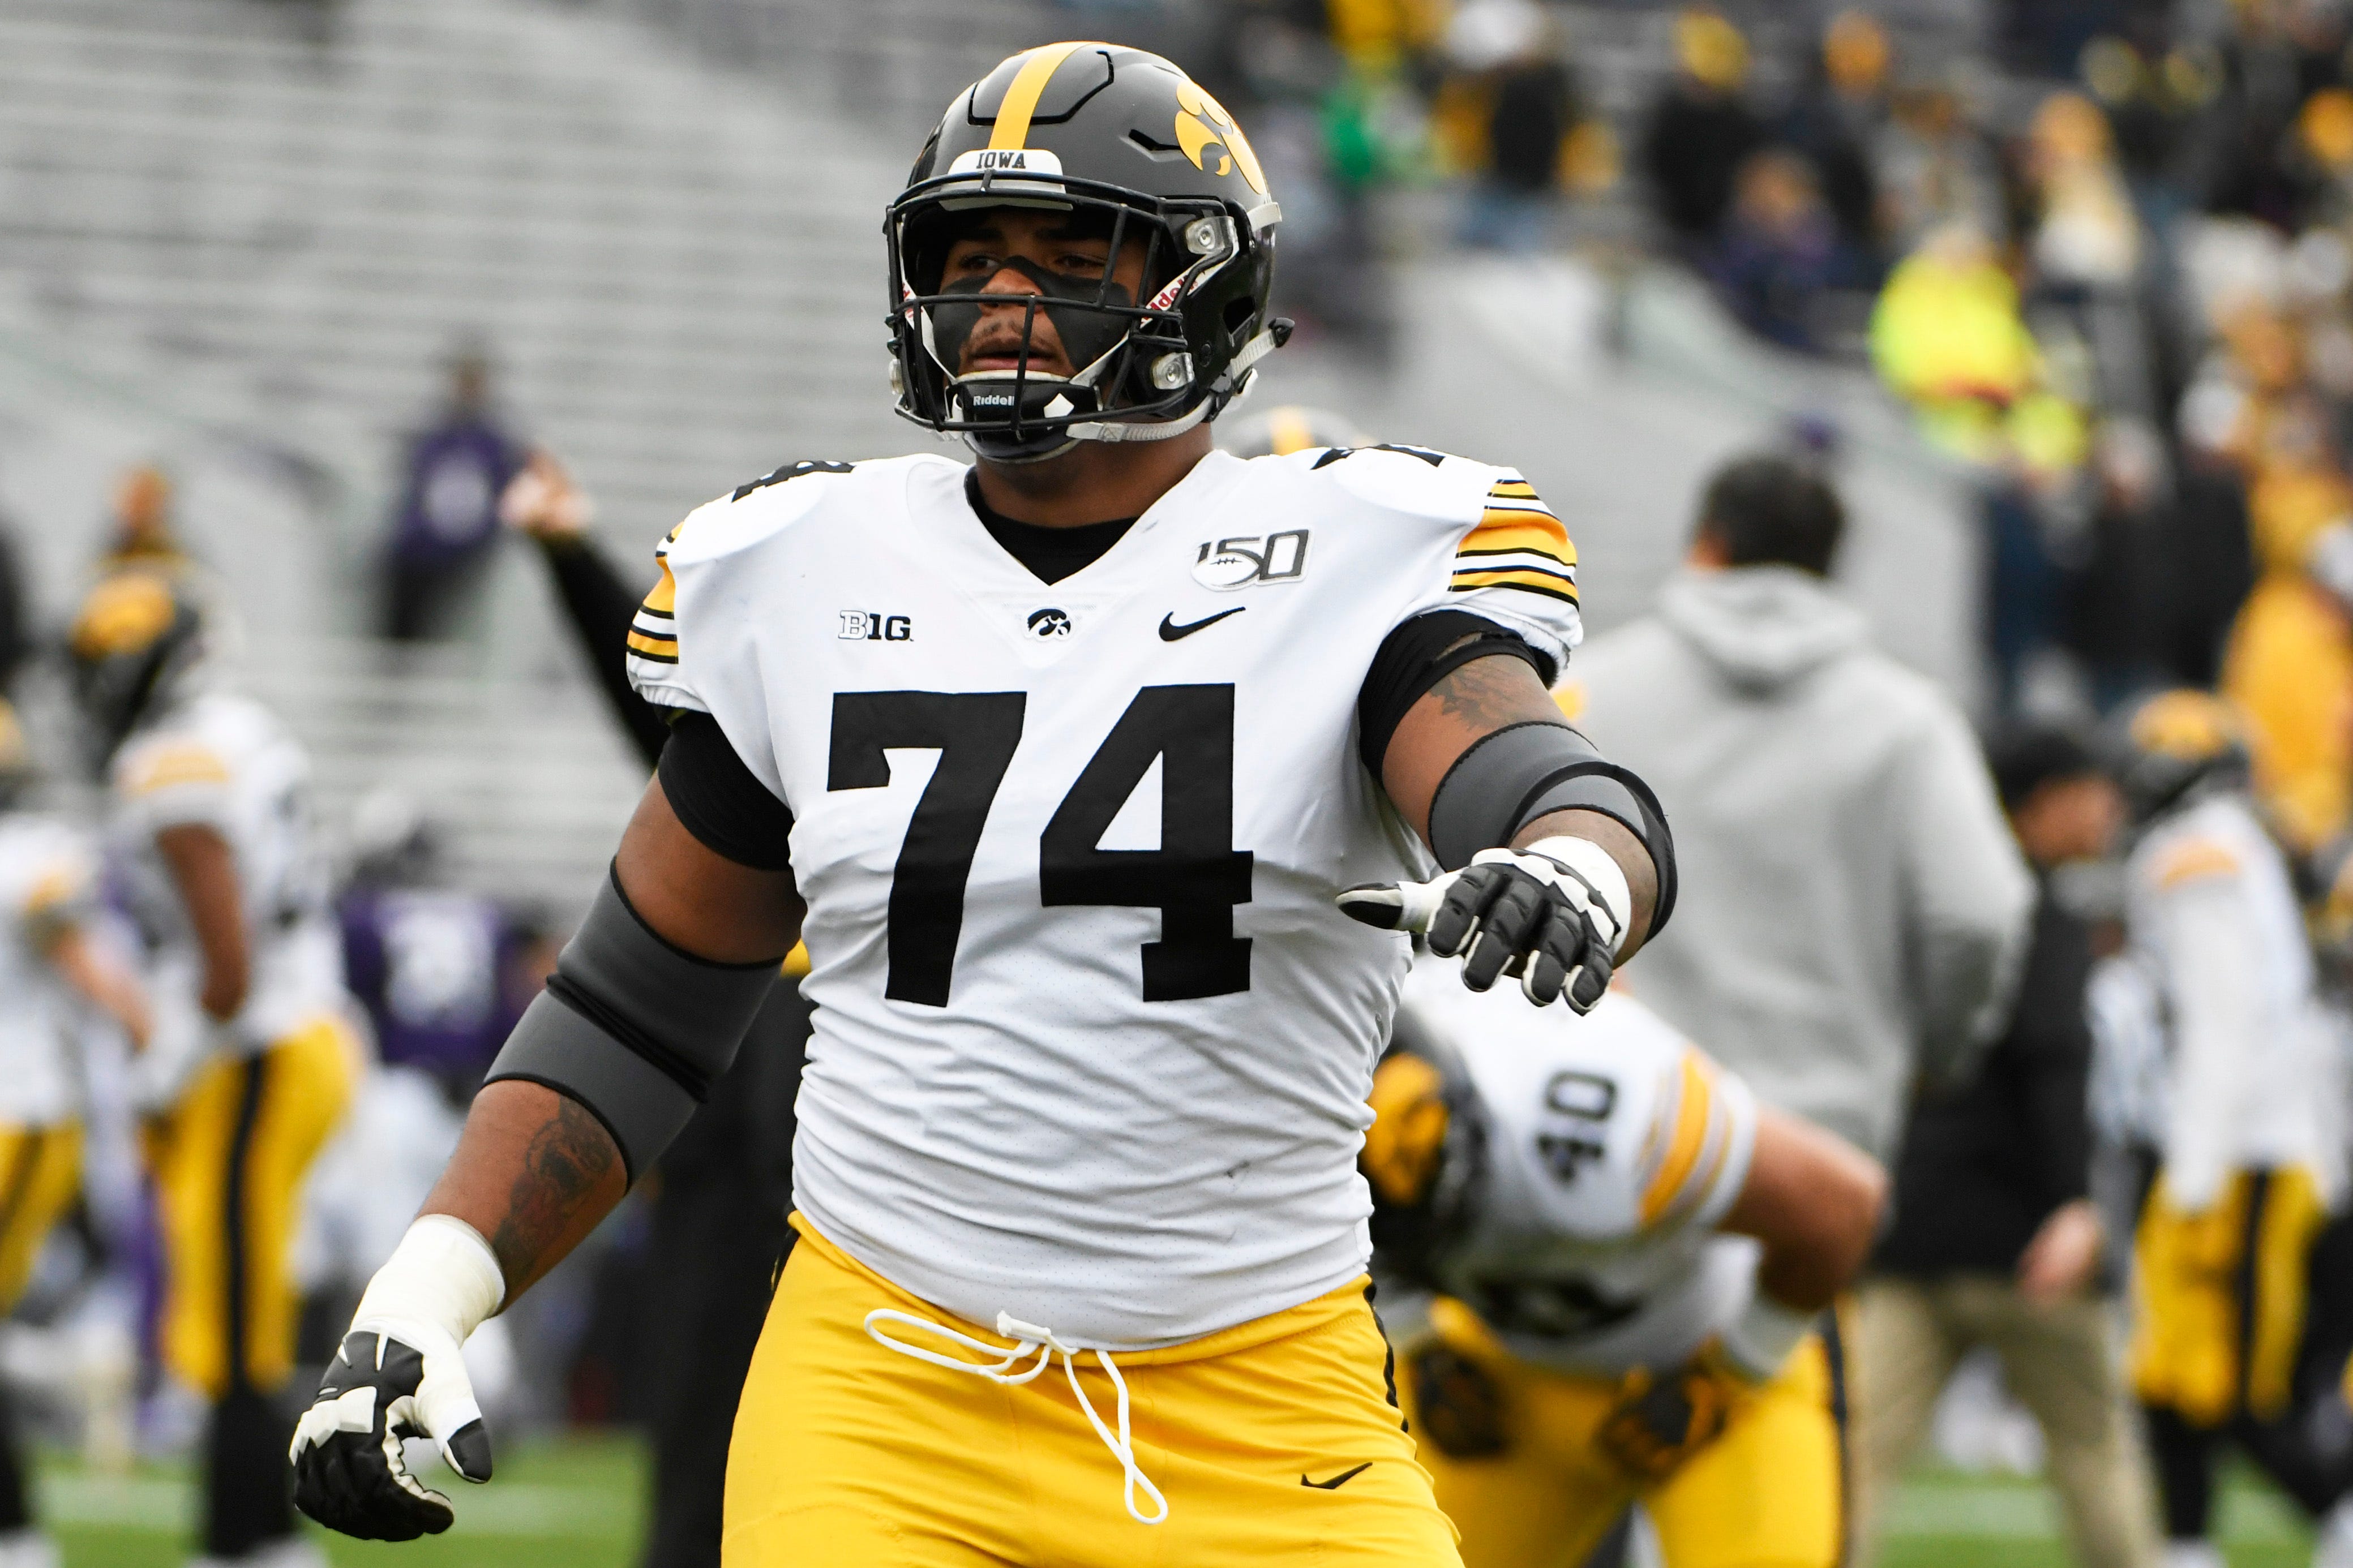 Iowa offensive lineman Tristan Wirfs (74) warms ups before a game against Northwestern an NCAA college football game, Saturday, Oct. 26, 2019, in Evanston, Ill. (AP Photo/David Banks)